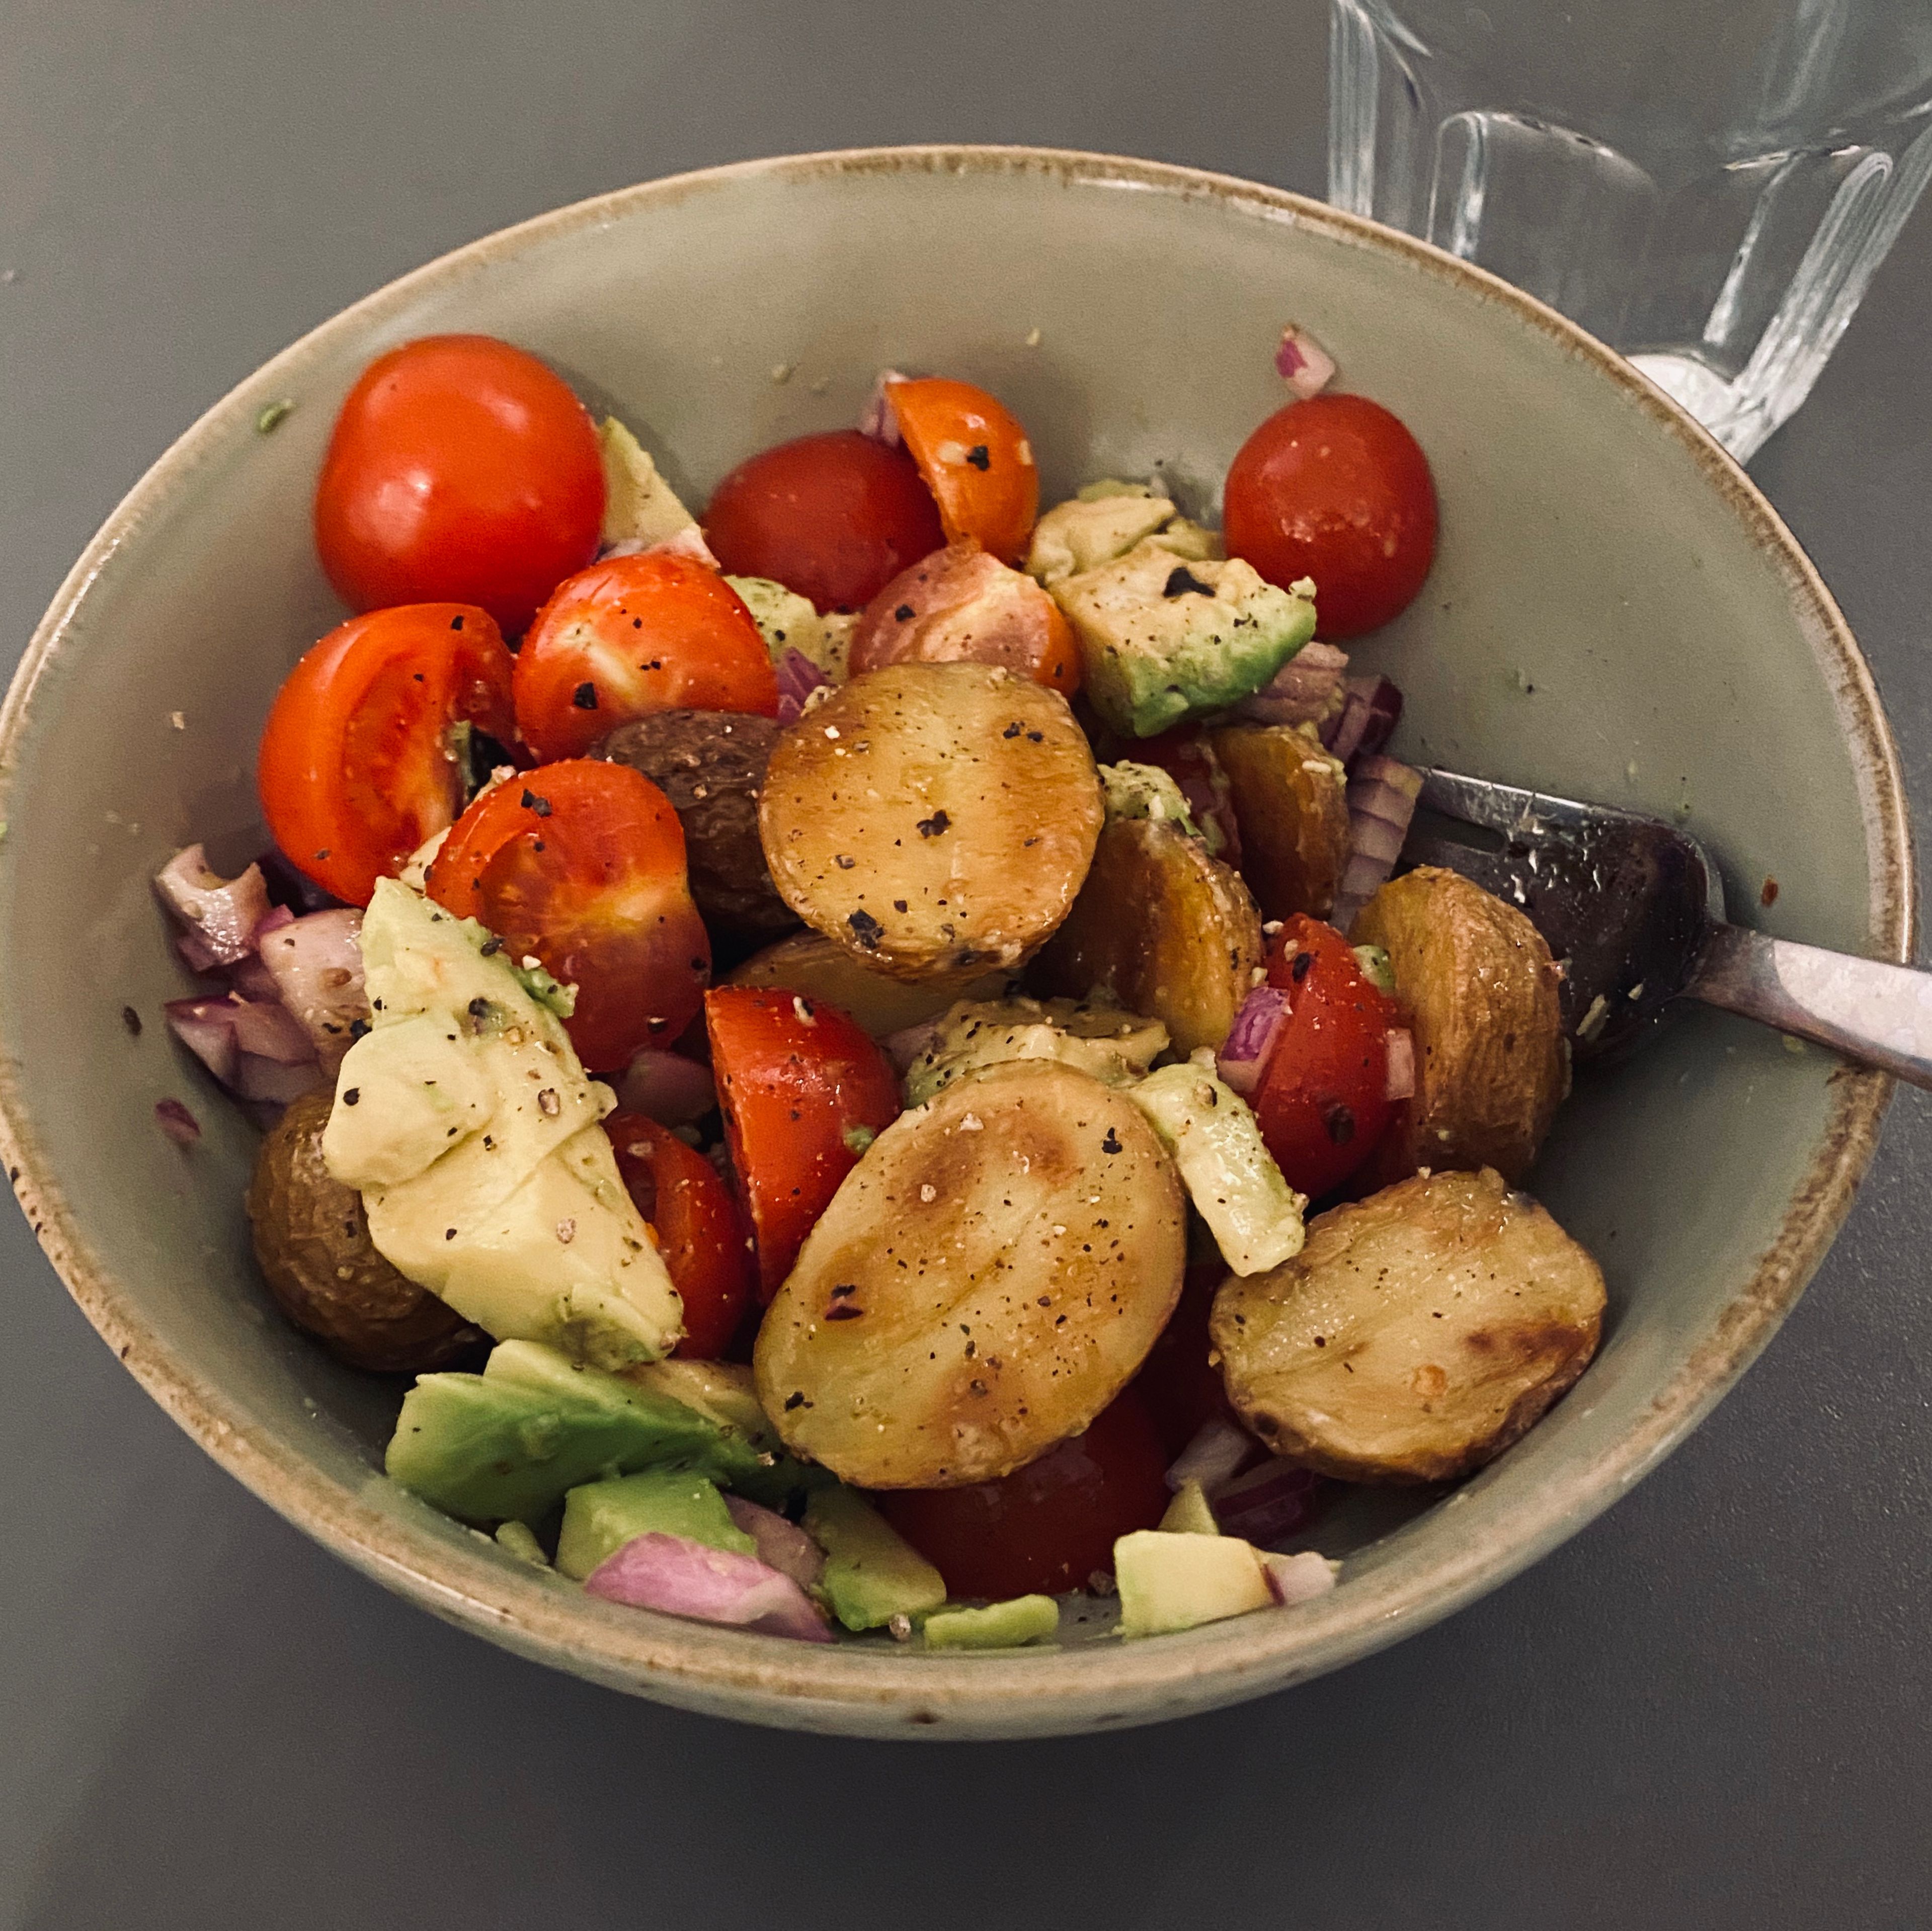 Simple potato salad with avocado and tomatoes